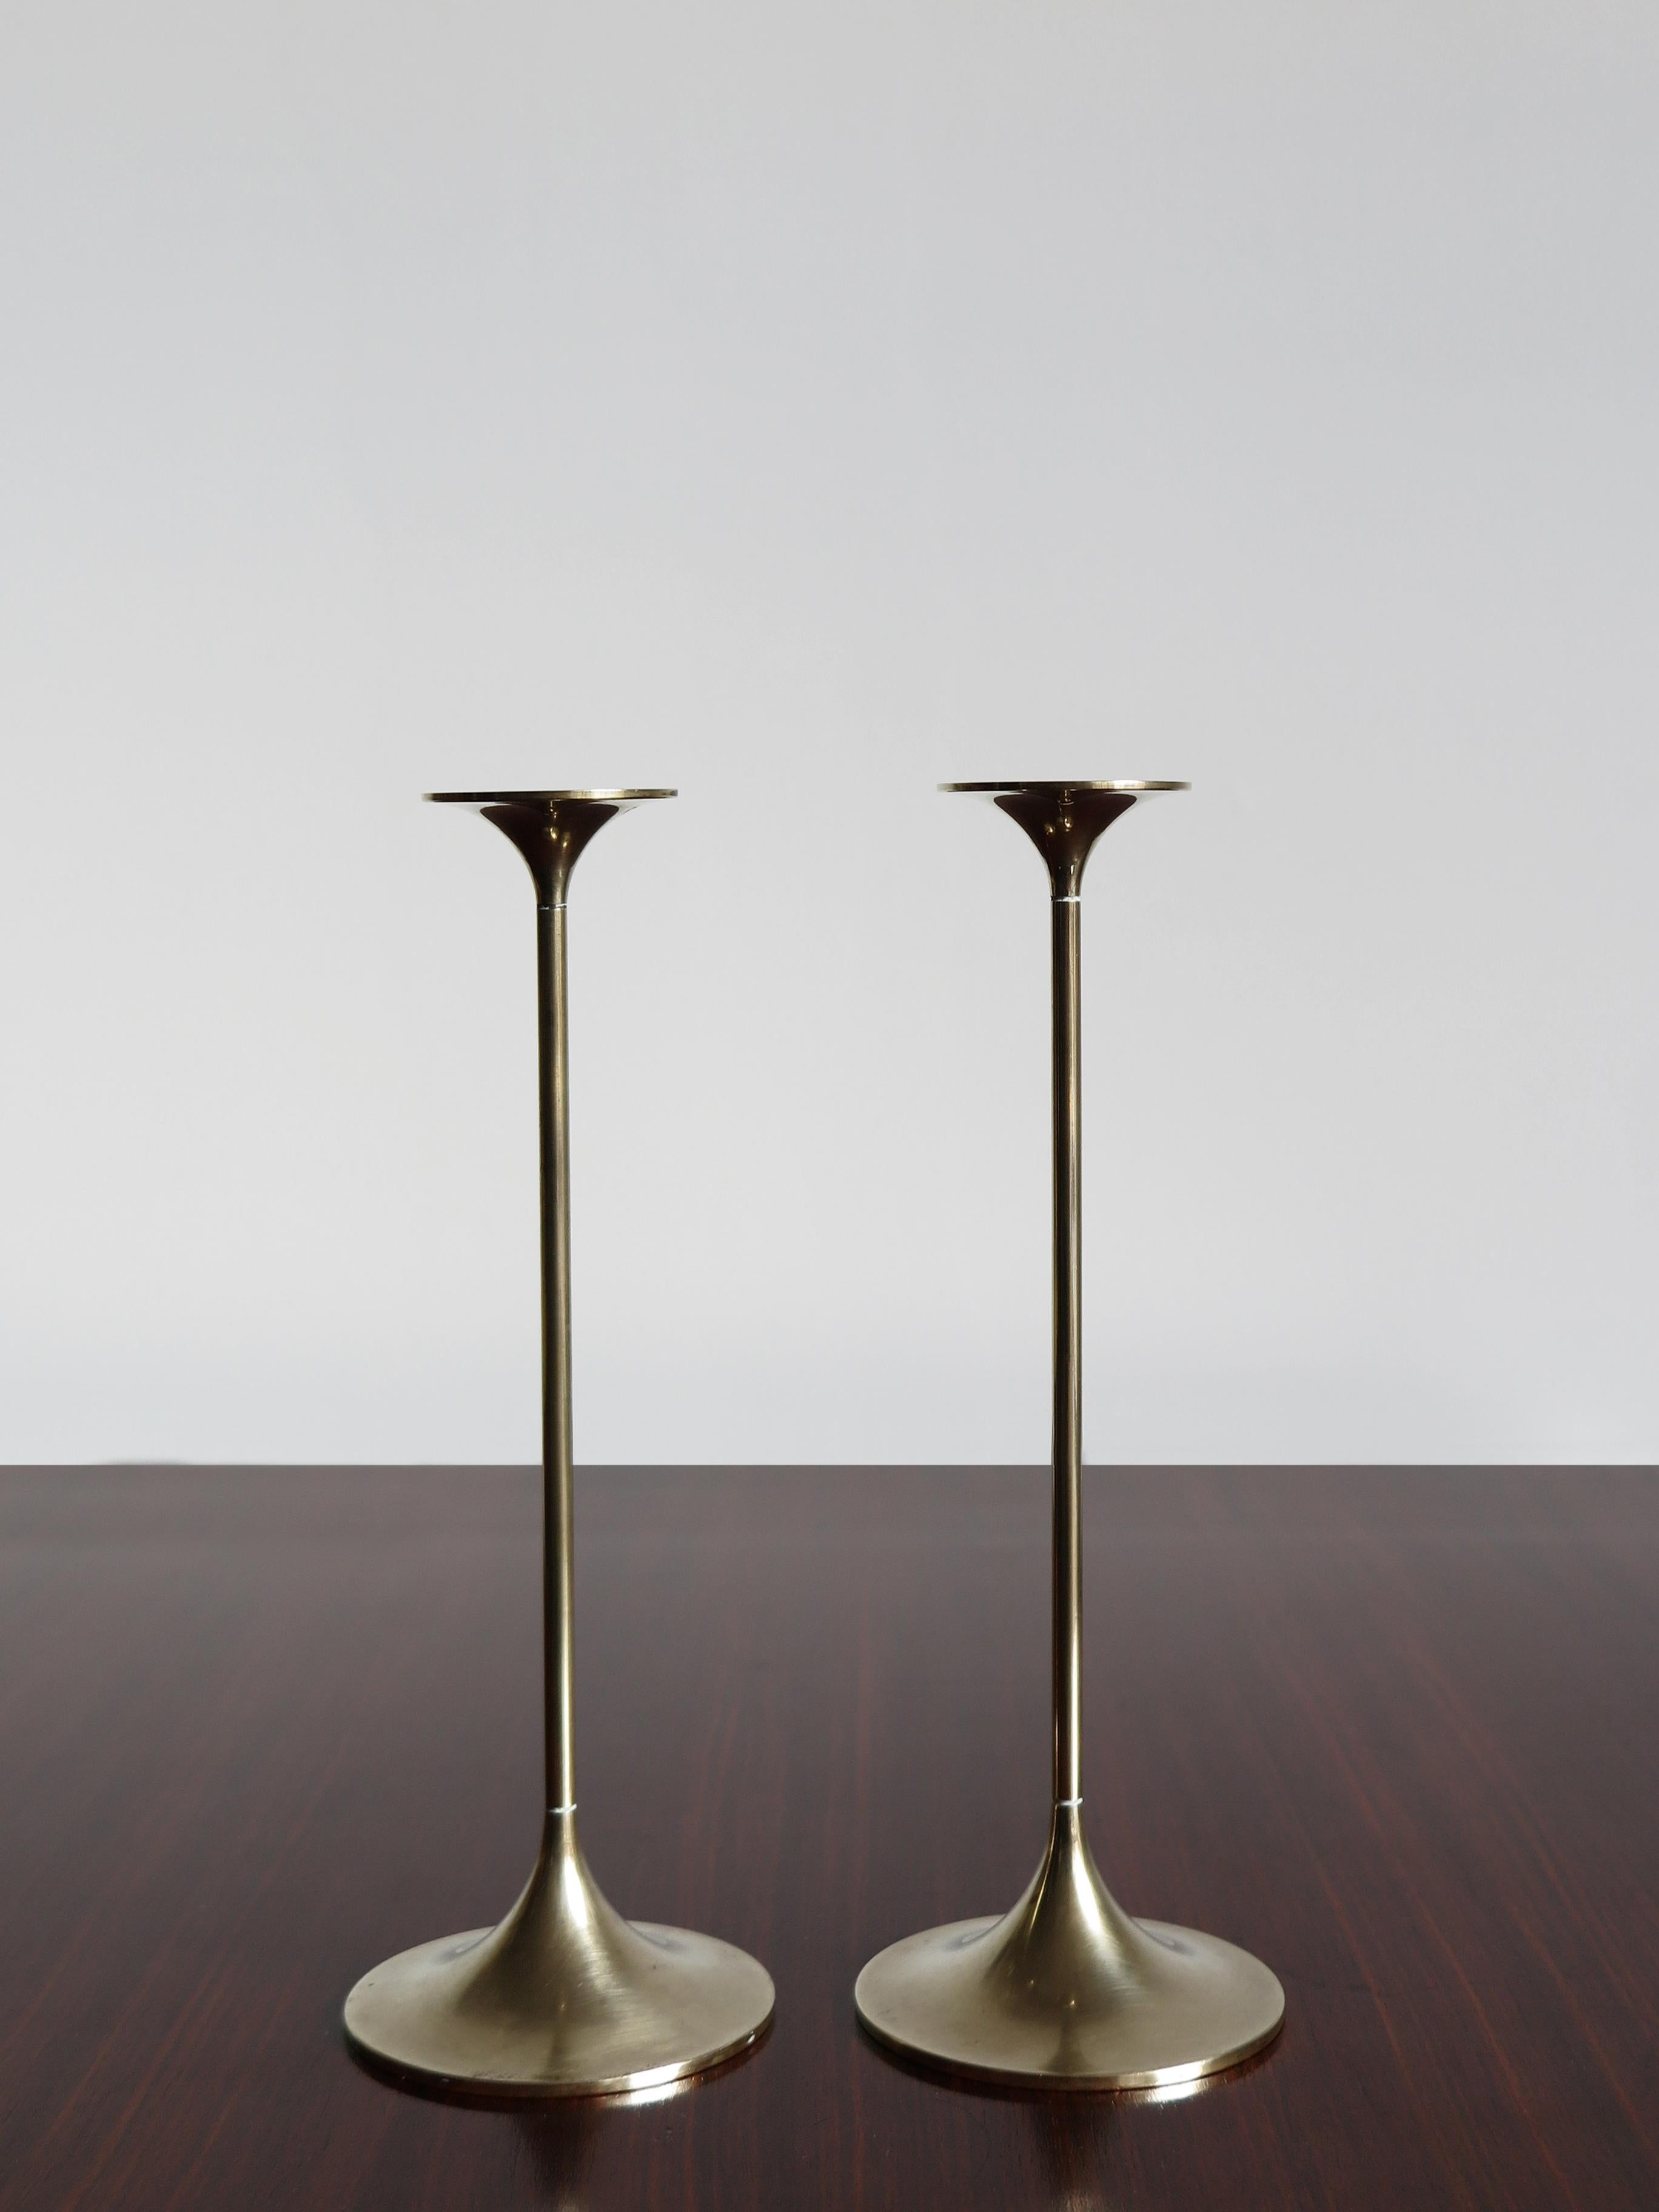 Pair of solid brass Mid-Century Modern design Scandinavian candleholders designed by Max Brüel for Torben Ørskov with engraved manufacturer logo, Denmark, circa 1950.

Please note that the items are original of the period and this shows normal